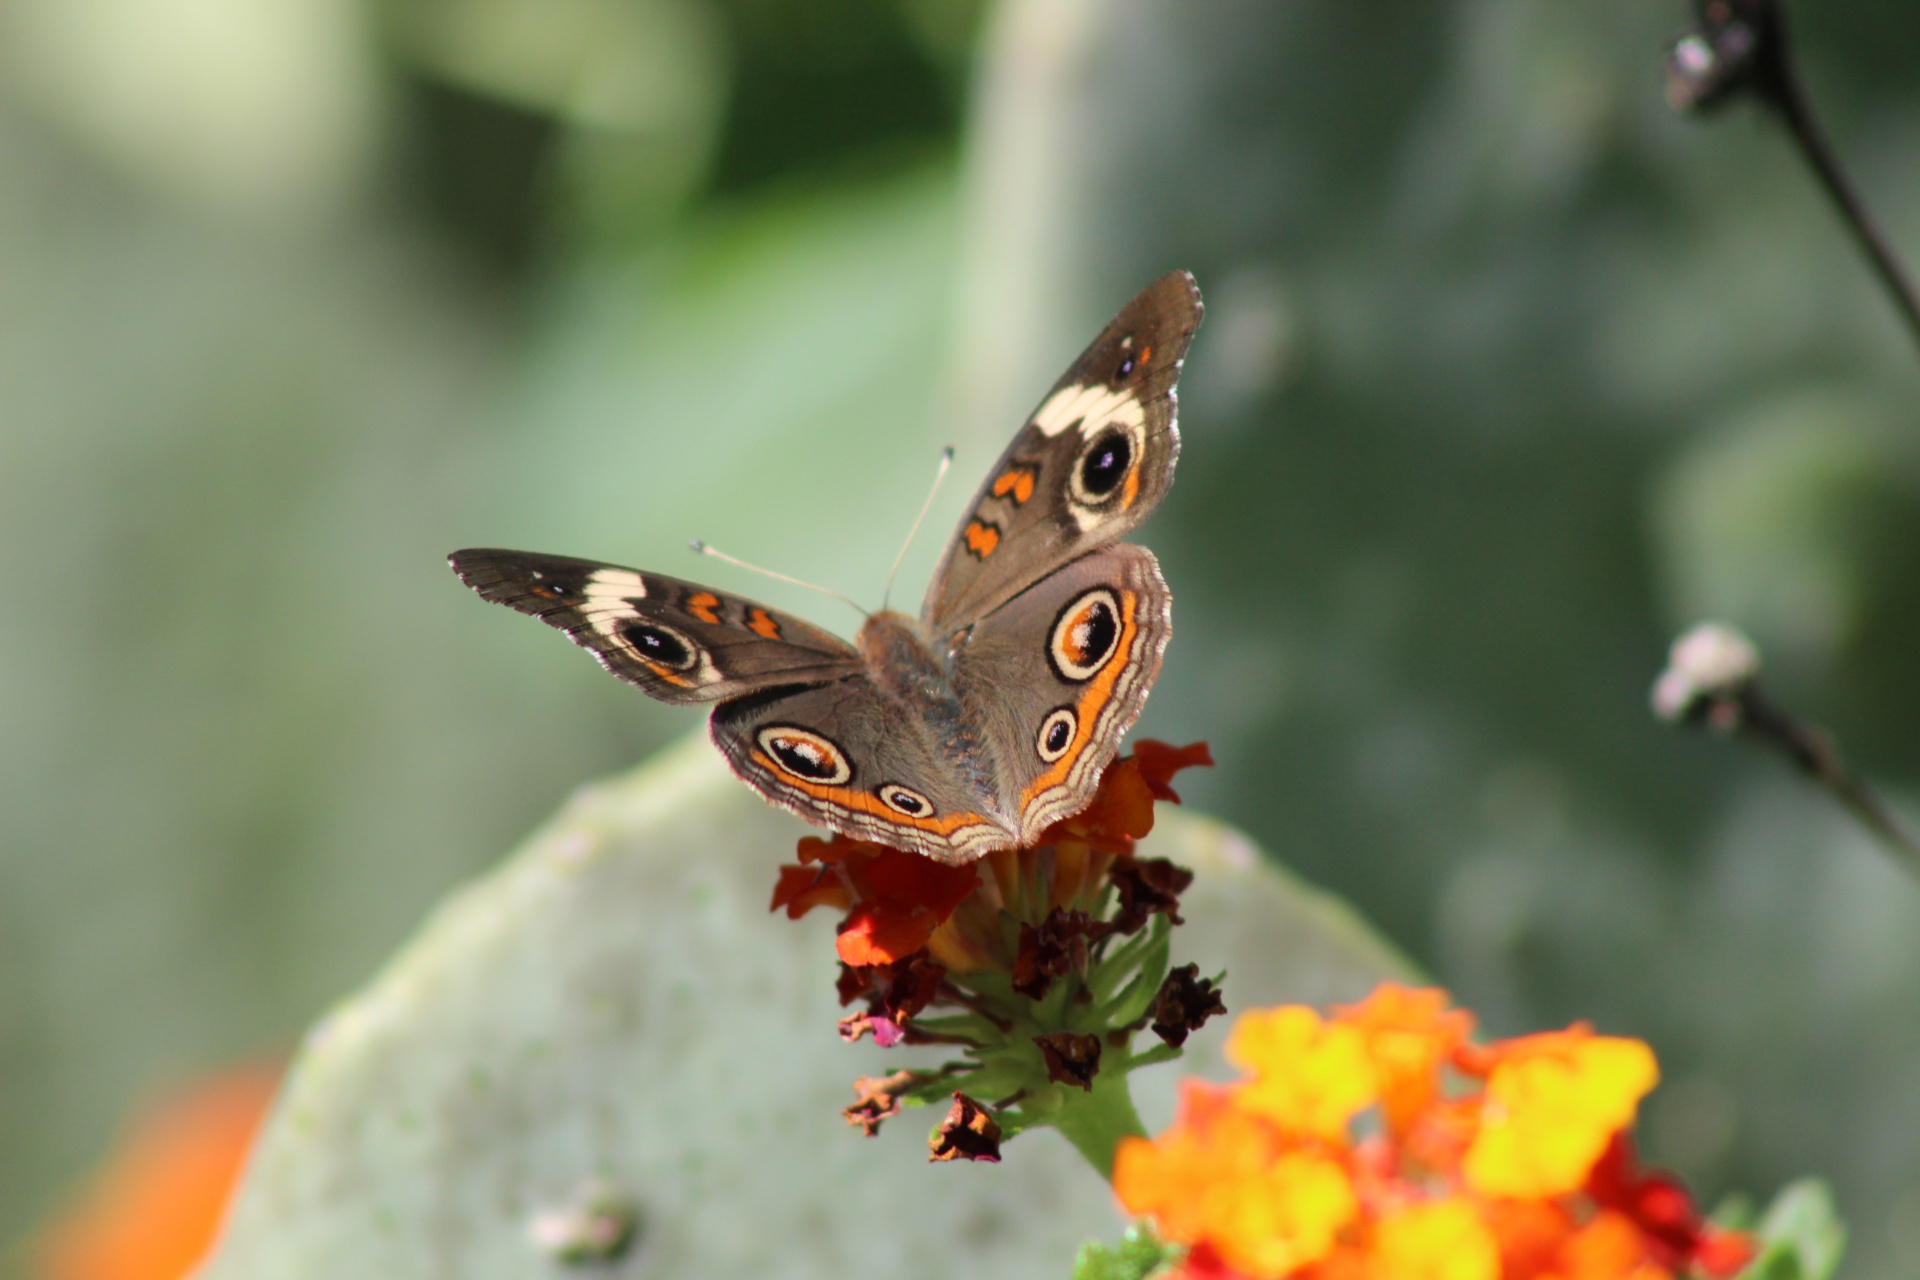 I am positive the butterfly I shot a picture of is a common buckeye, but uniquely, it has no purple in the big orange and black spot. It is awesome how each butterfly is slightly different, yet recognizable as a particular species.